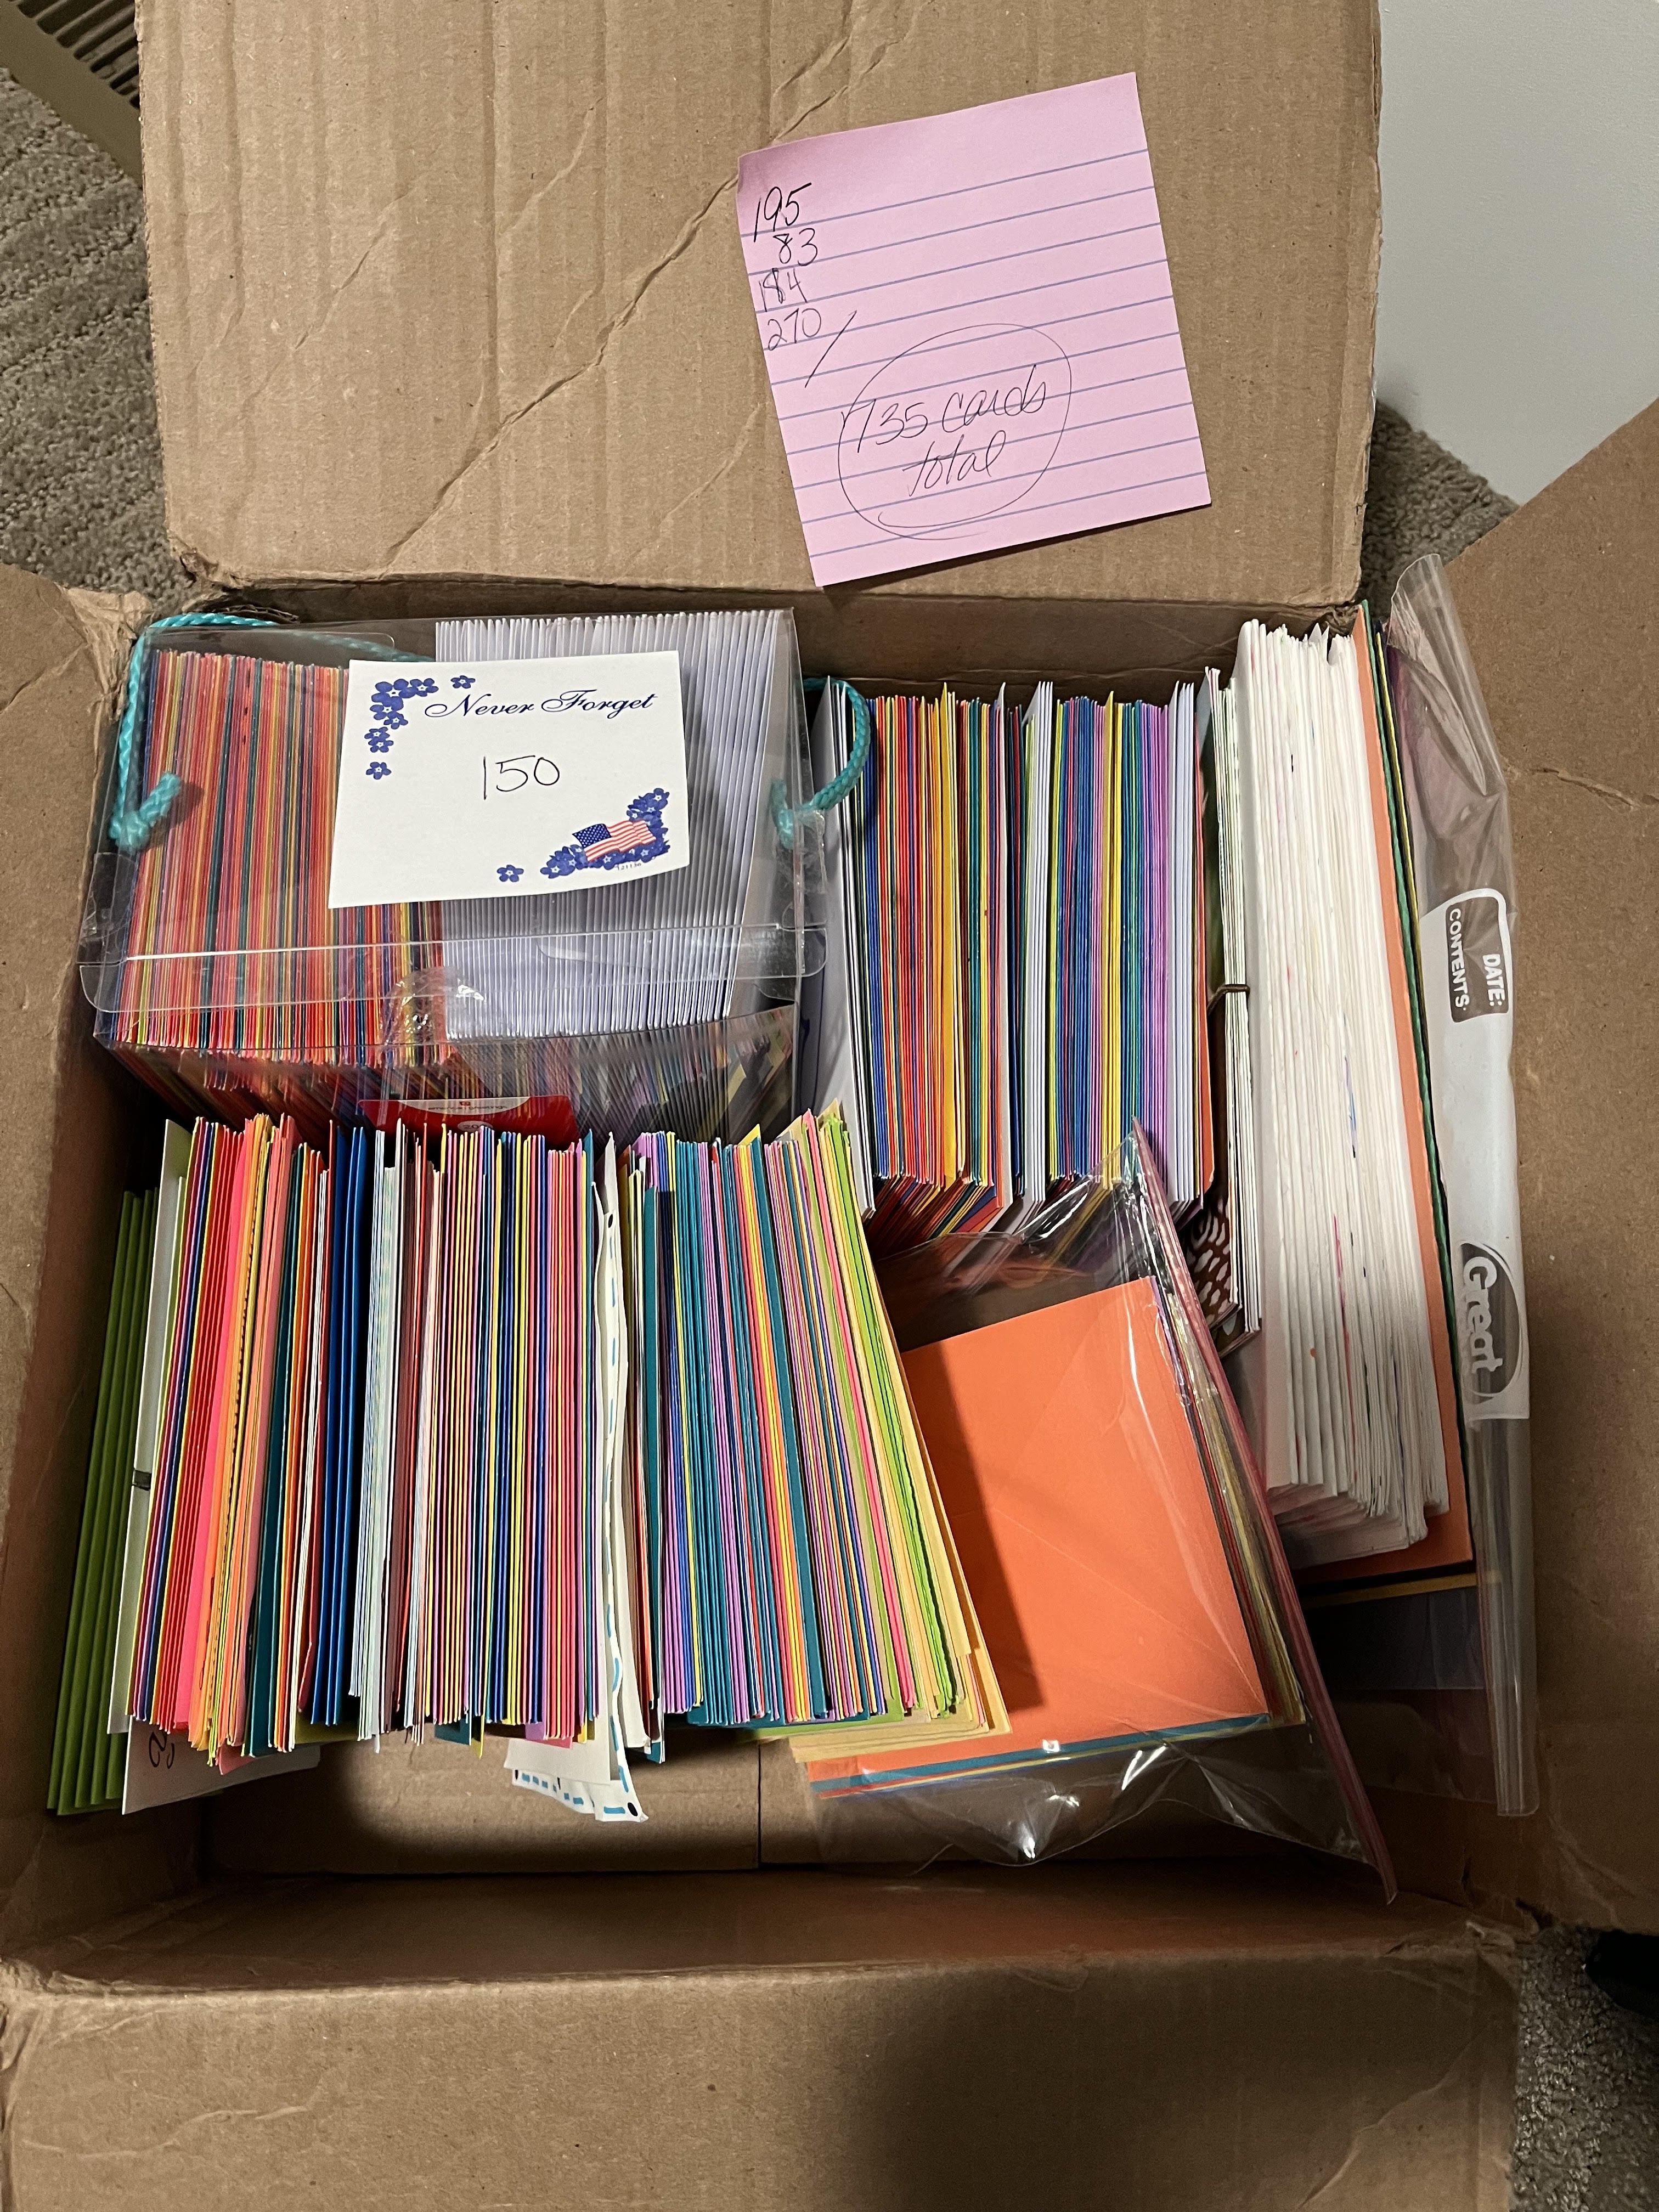 A photo of a cardboard box filled with 735 hand-drawn thank you cards in various colors and sizes.